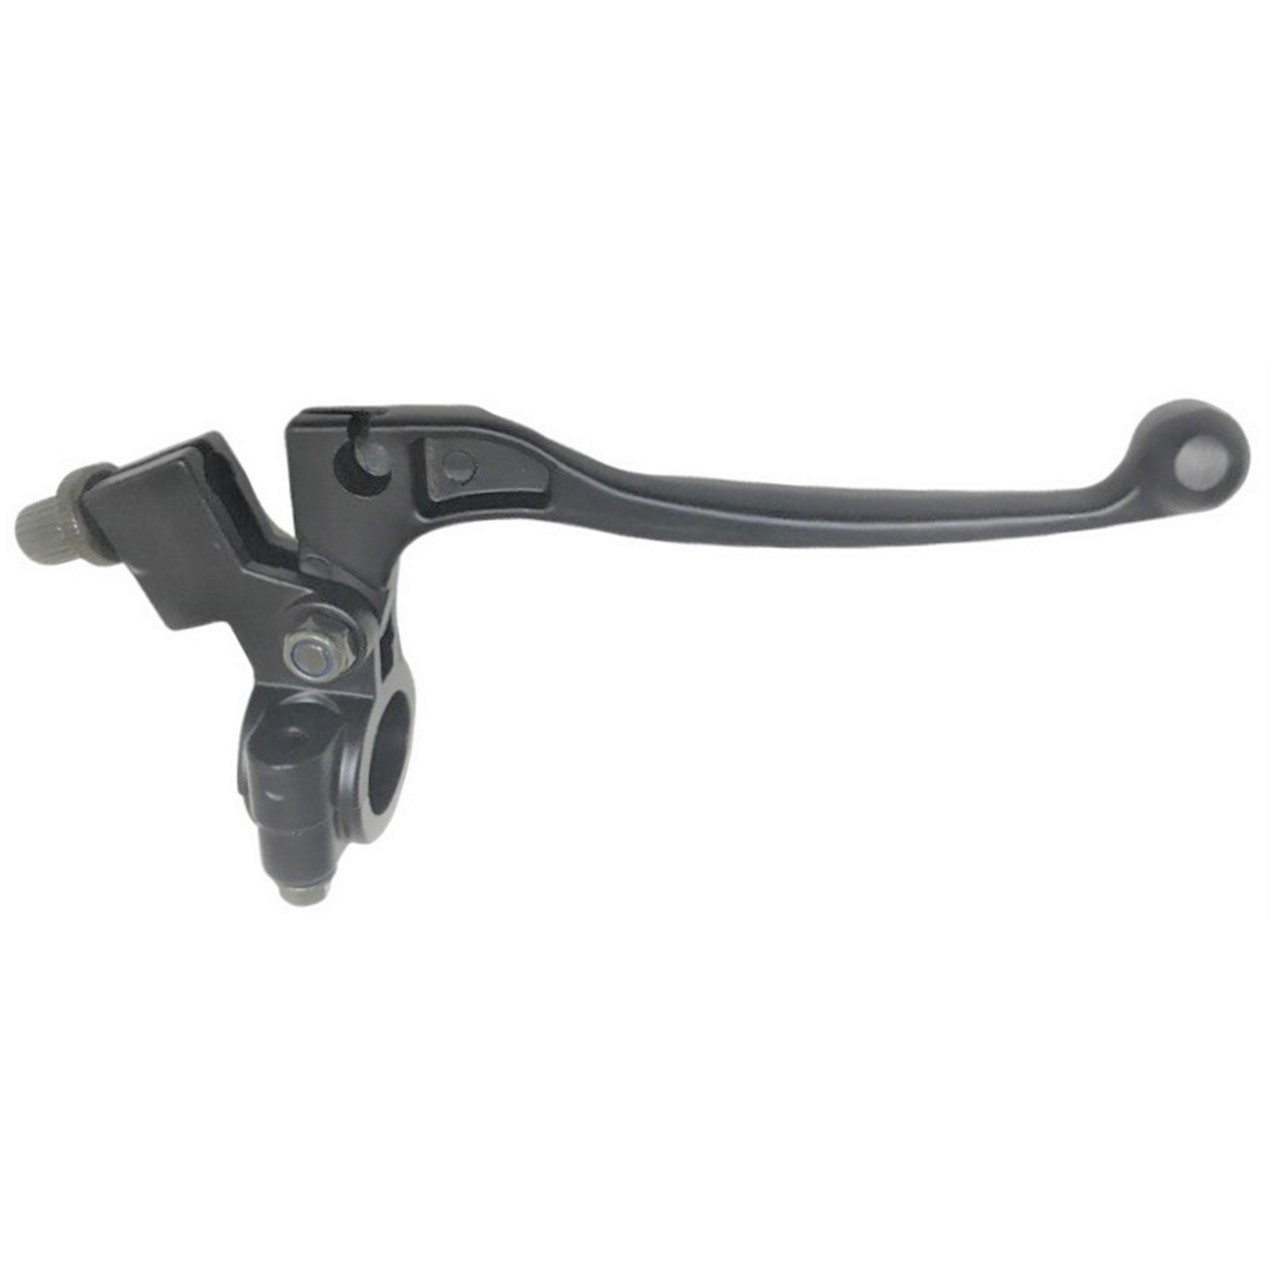 BRAKE LEVER ASSEMBLY (Left Hand) Fits Baja + Many Other Products ID=22mm or 7/8" Lever=4.78"